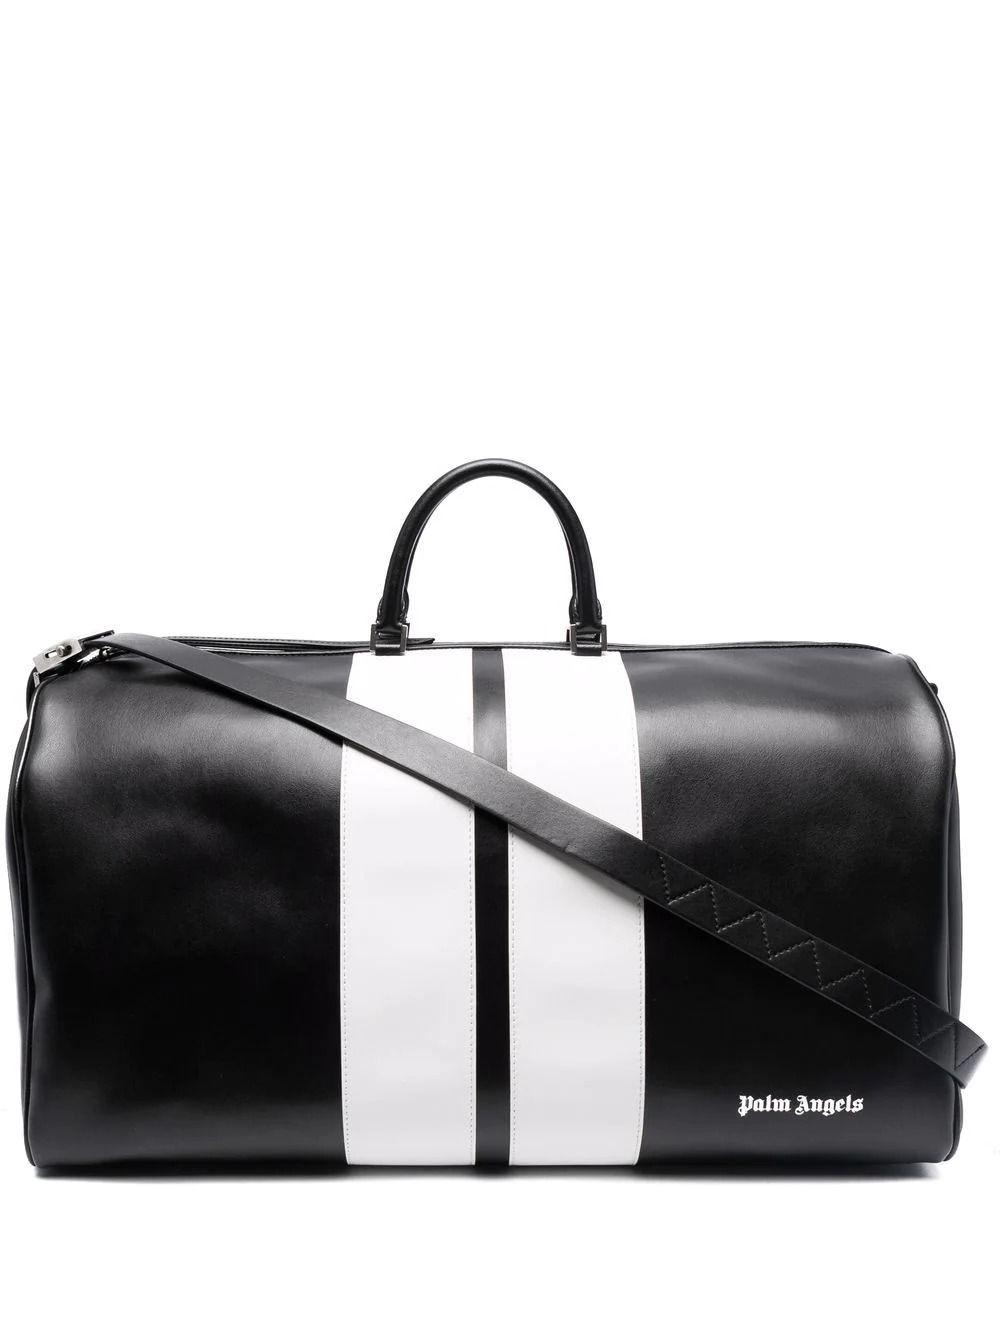 Black Mens Bags Luggage and suitcases Palm Angels Classic Leather Track Travel Bag in Black/White for Men 